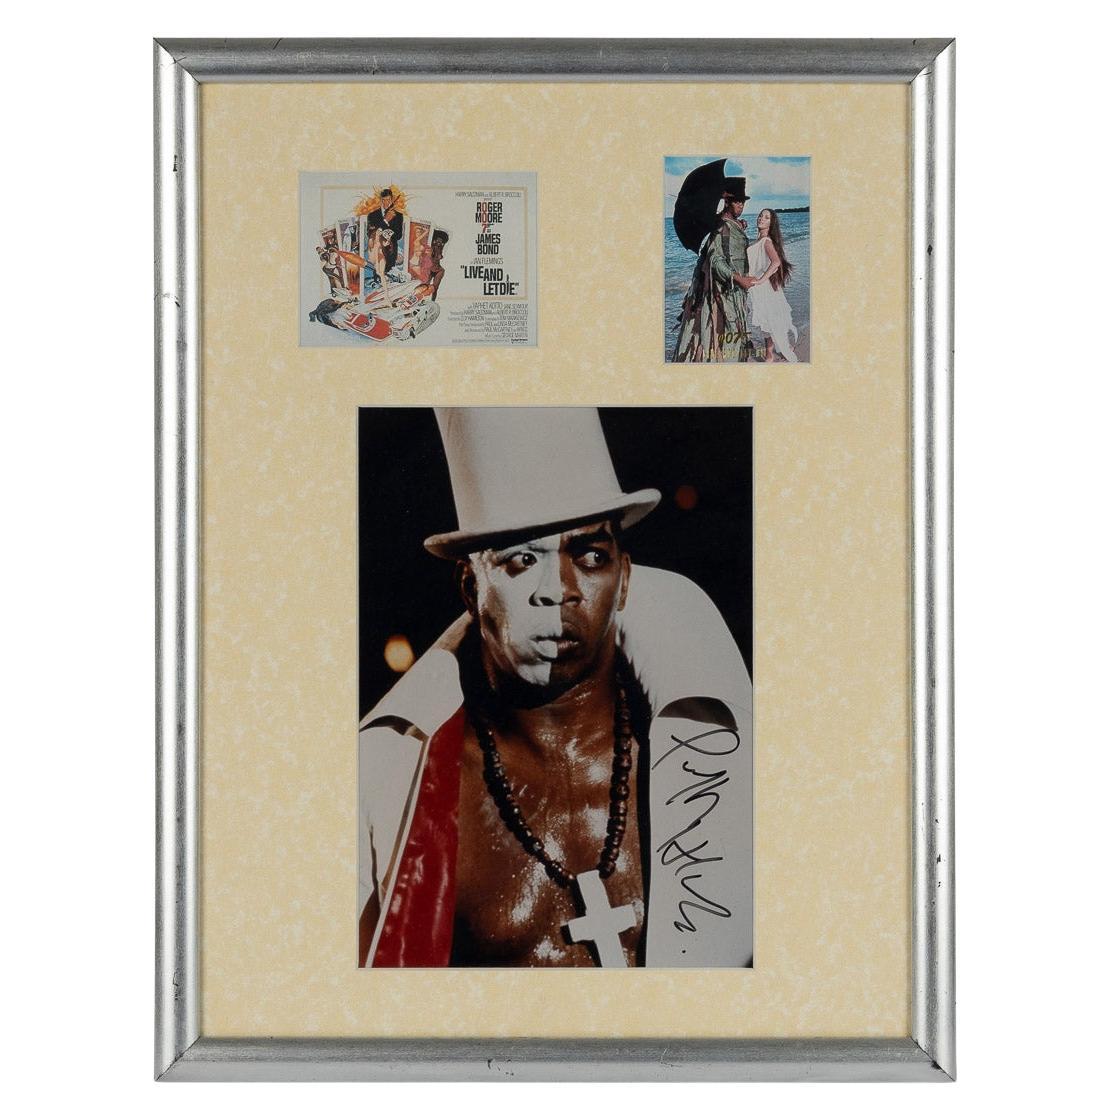 Original Signed Photograph By Geoffrey Holder, Featured In Bond "Live & Let Die"